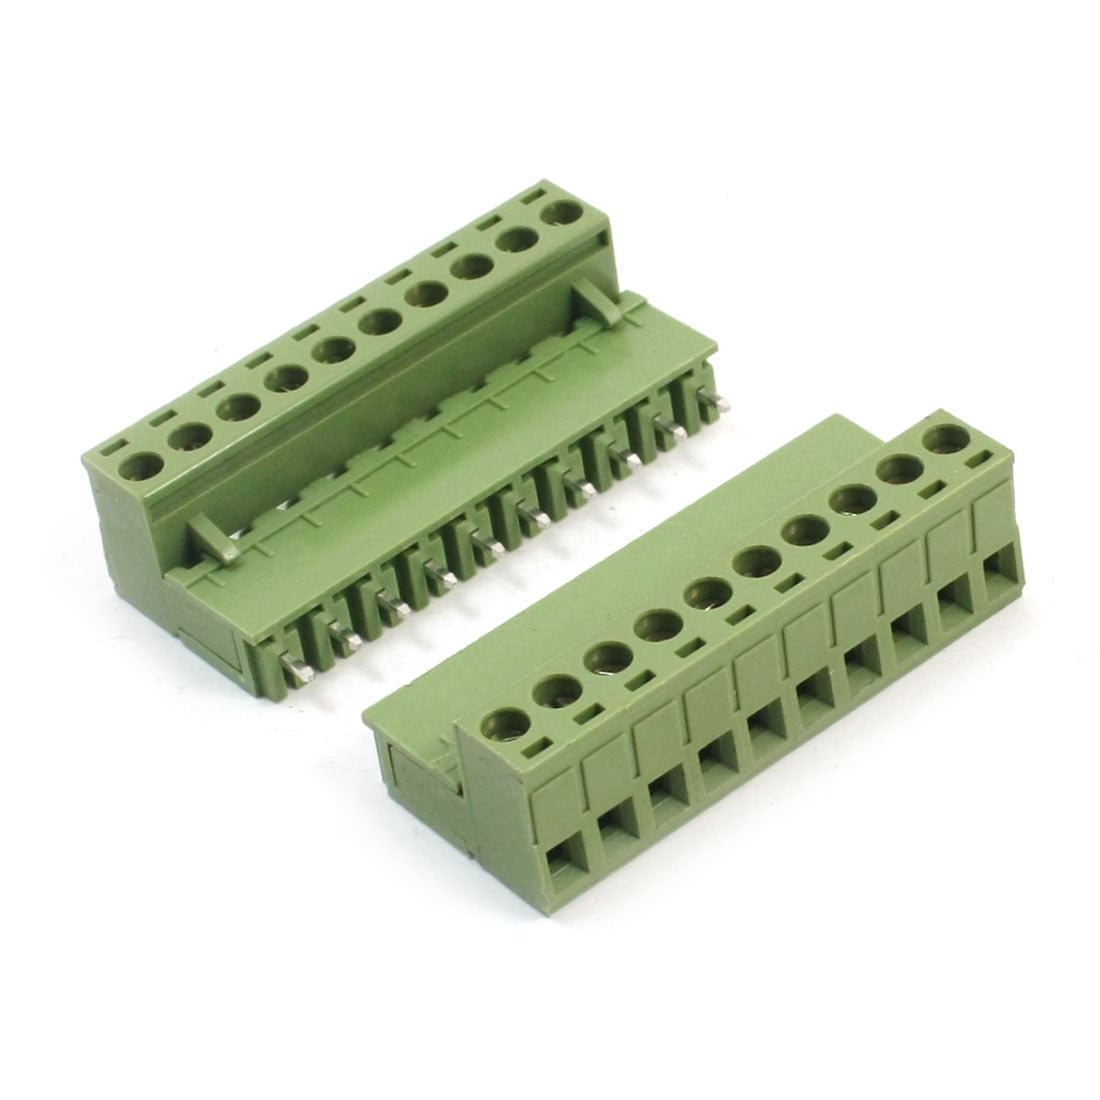 5 Pcs Pitch 5.08mm 9way/pin Screw Terminal Block Connector w/Straight-pin Green Color Pluggable Type Skywalking 